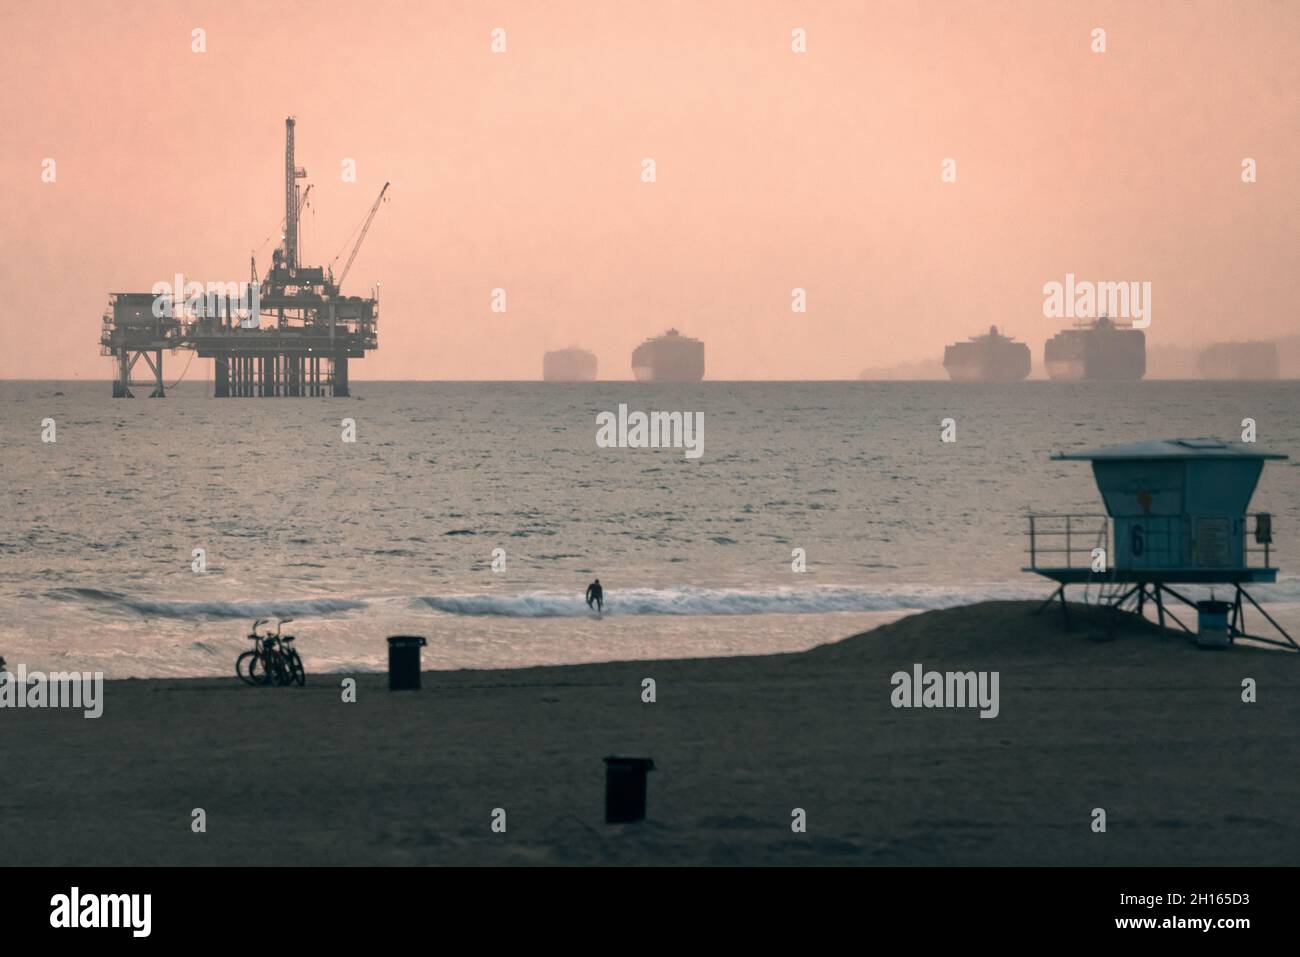 A lone surfer comes in on a wave at Huntingdon beach, oil rig and c ontainer ships dot the horizon at sunset. Stock Photo